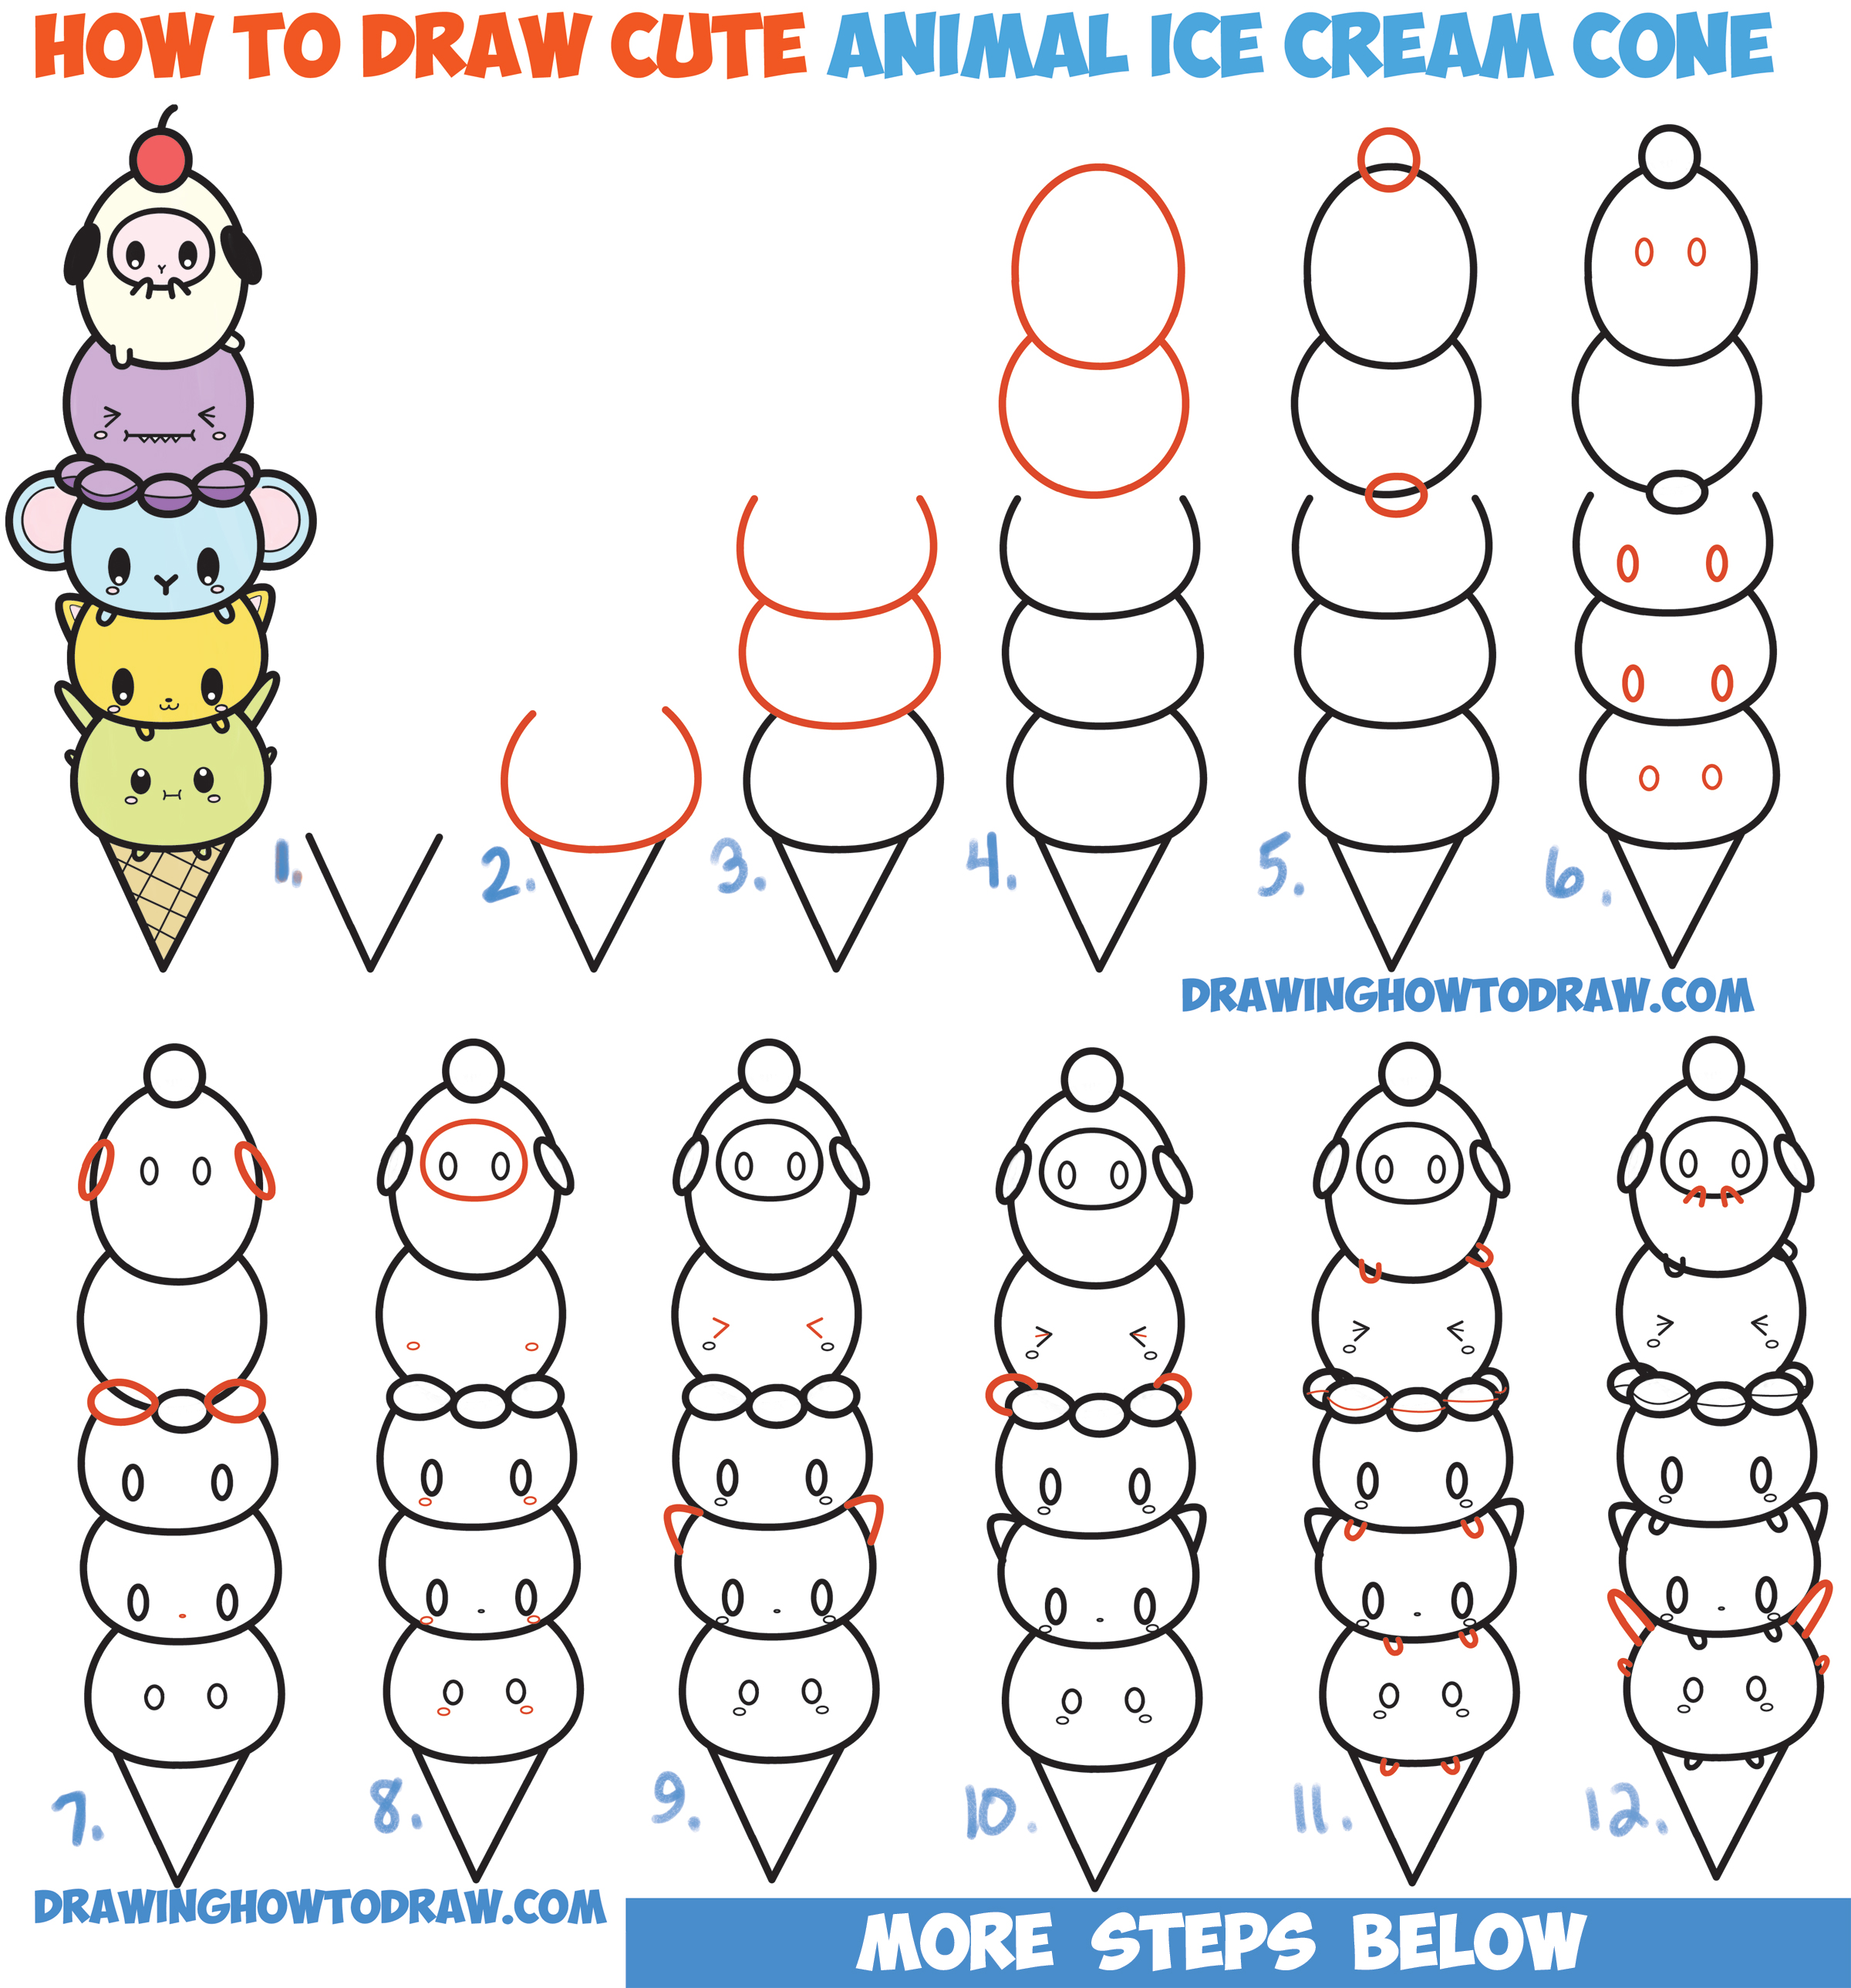 How to Draw Cute Kawaii Animals Stacked in Ice Cream Cone Easy Step by Step Drawing Tutorial for Kids & Beginners